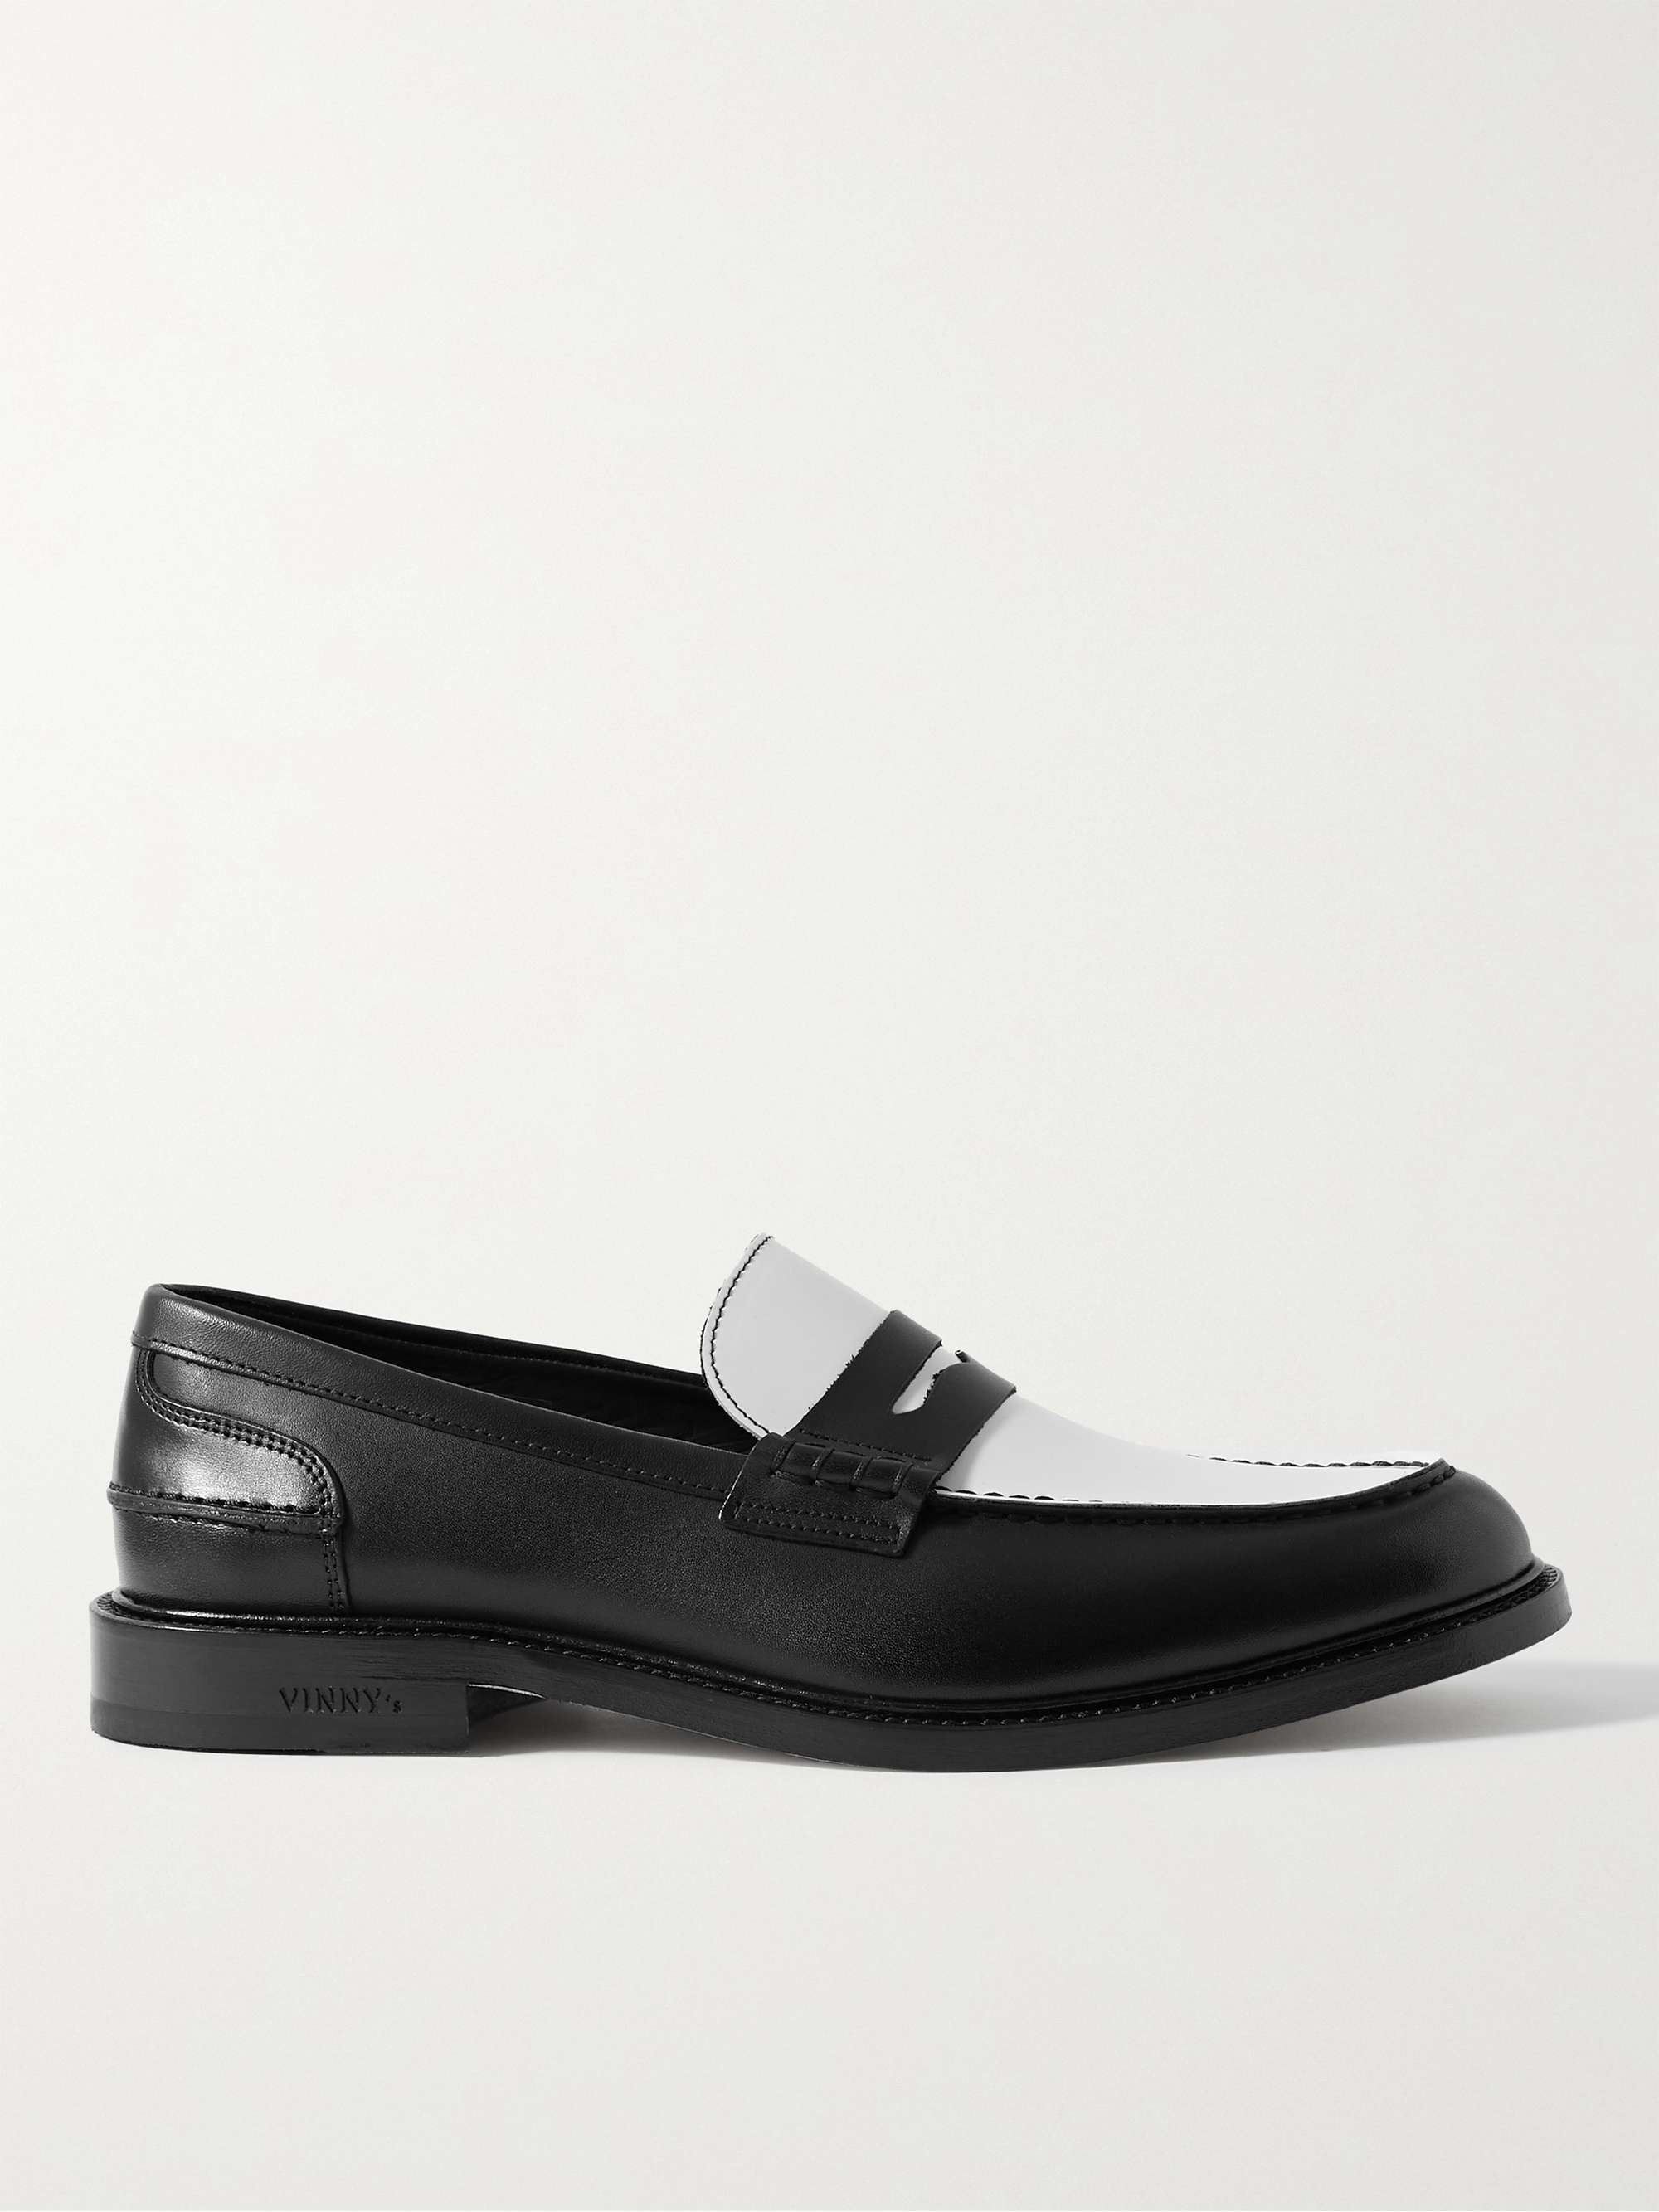 VINNY'S Townee Two-Tone Leather Penny Loafers